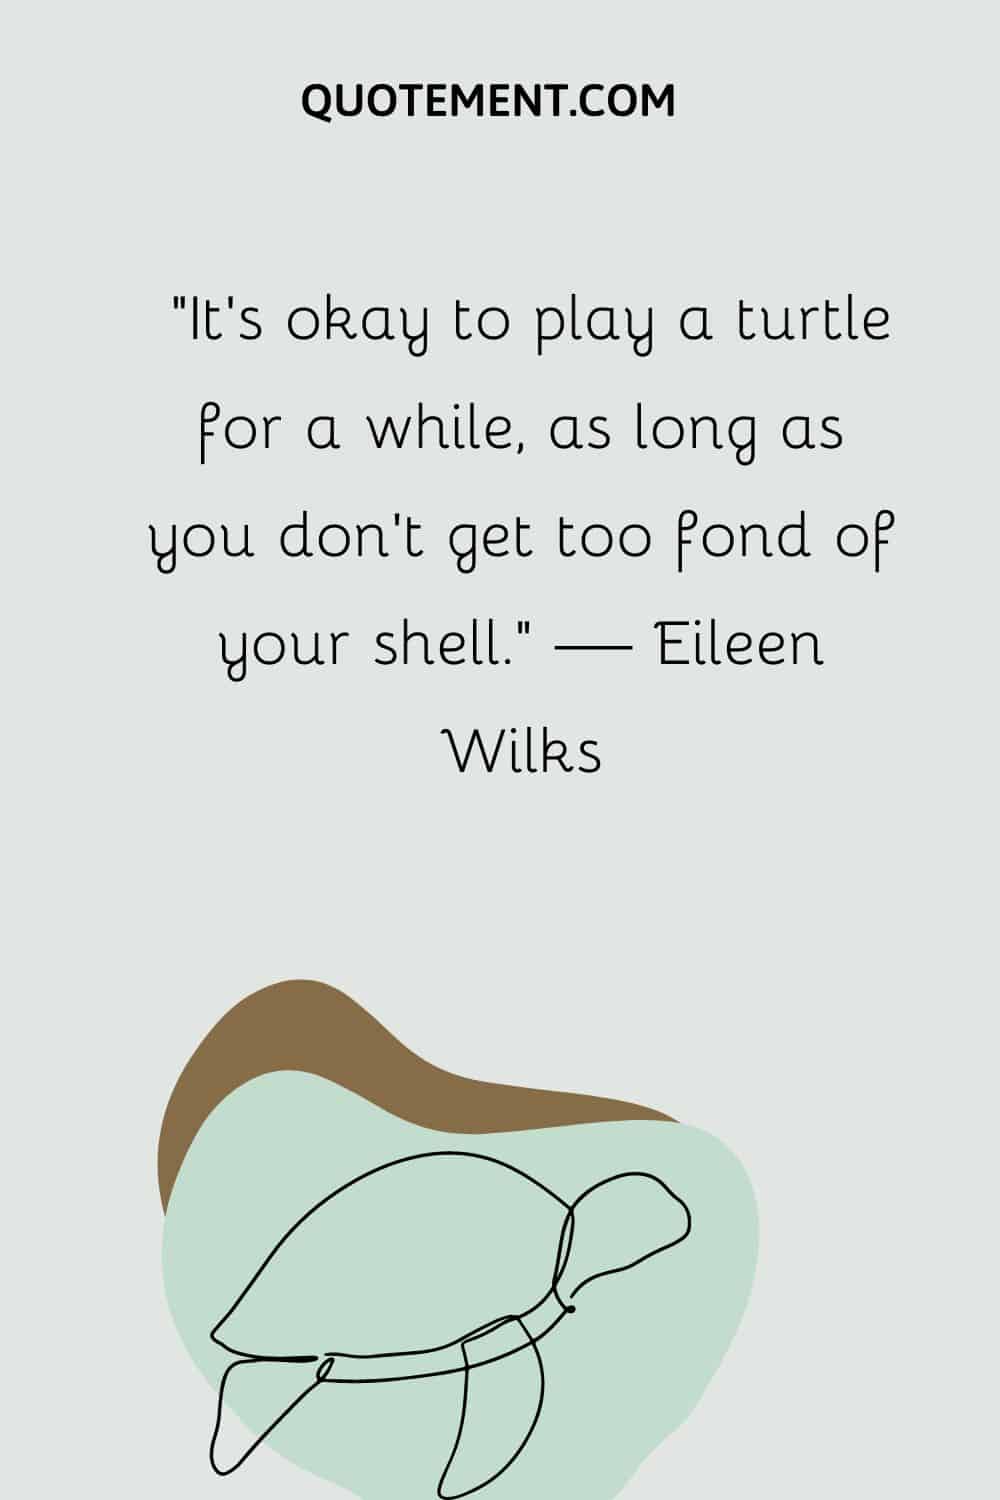 It’s okay to play a turtle for a while, as long as you don’t get too fond of your shell